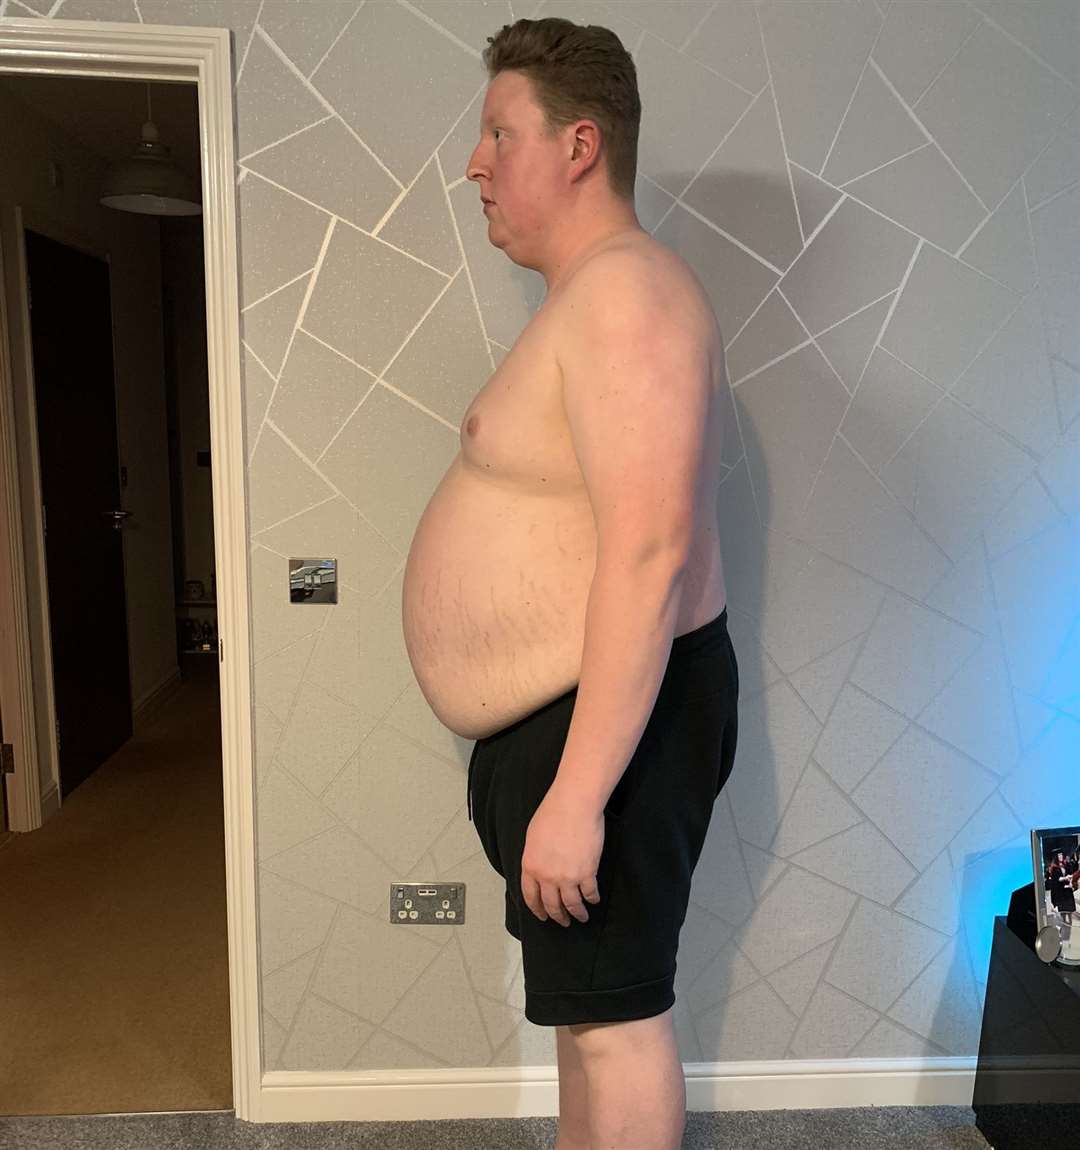 Oliver Hagerty, from Faversham, decided to ditch the junk food after seeing he weighed 26st